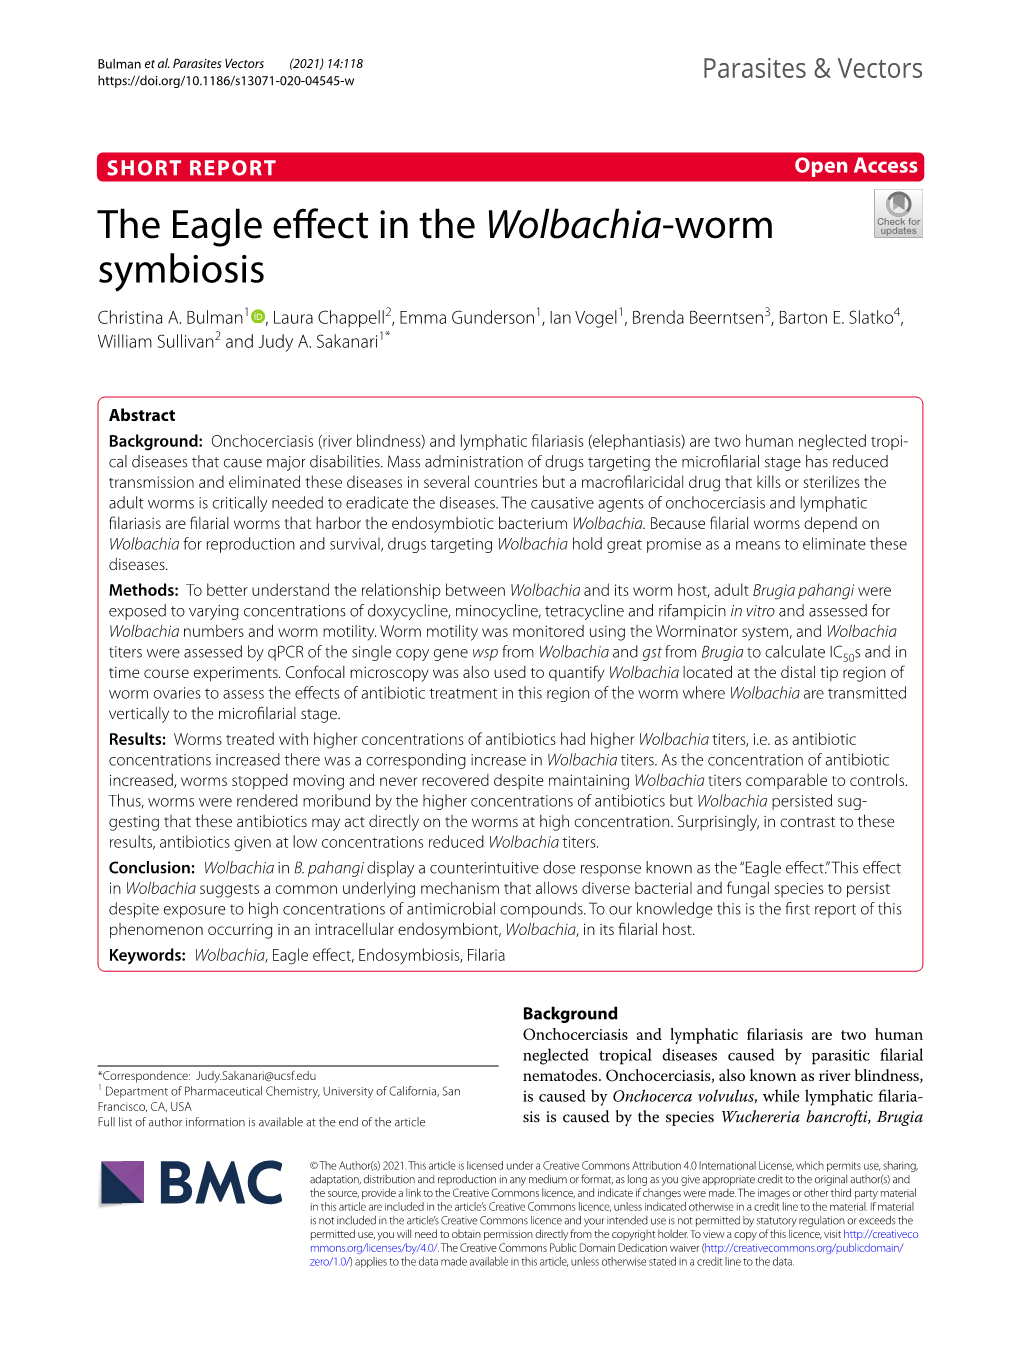 The Eagle Effect in the Wolbachia-Worm Symbiosis